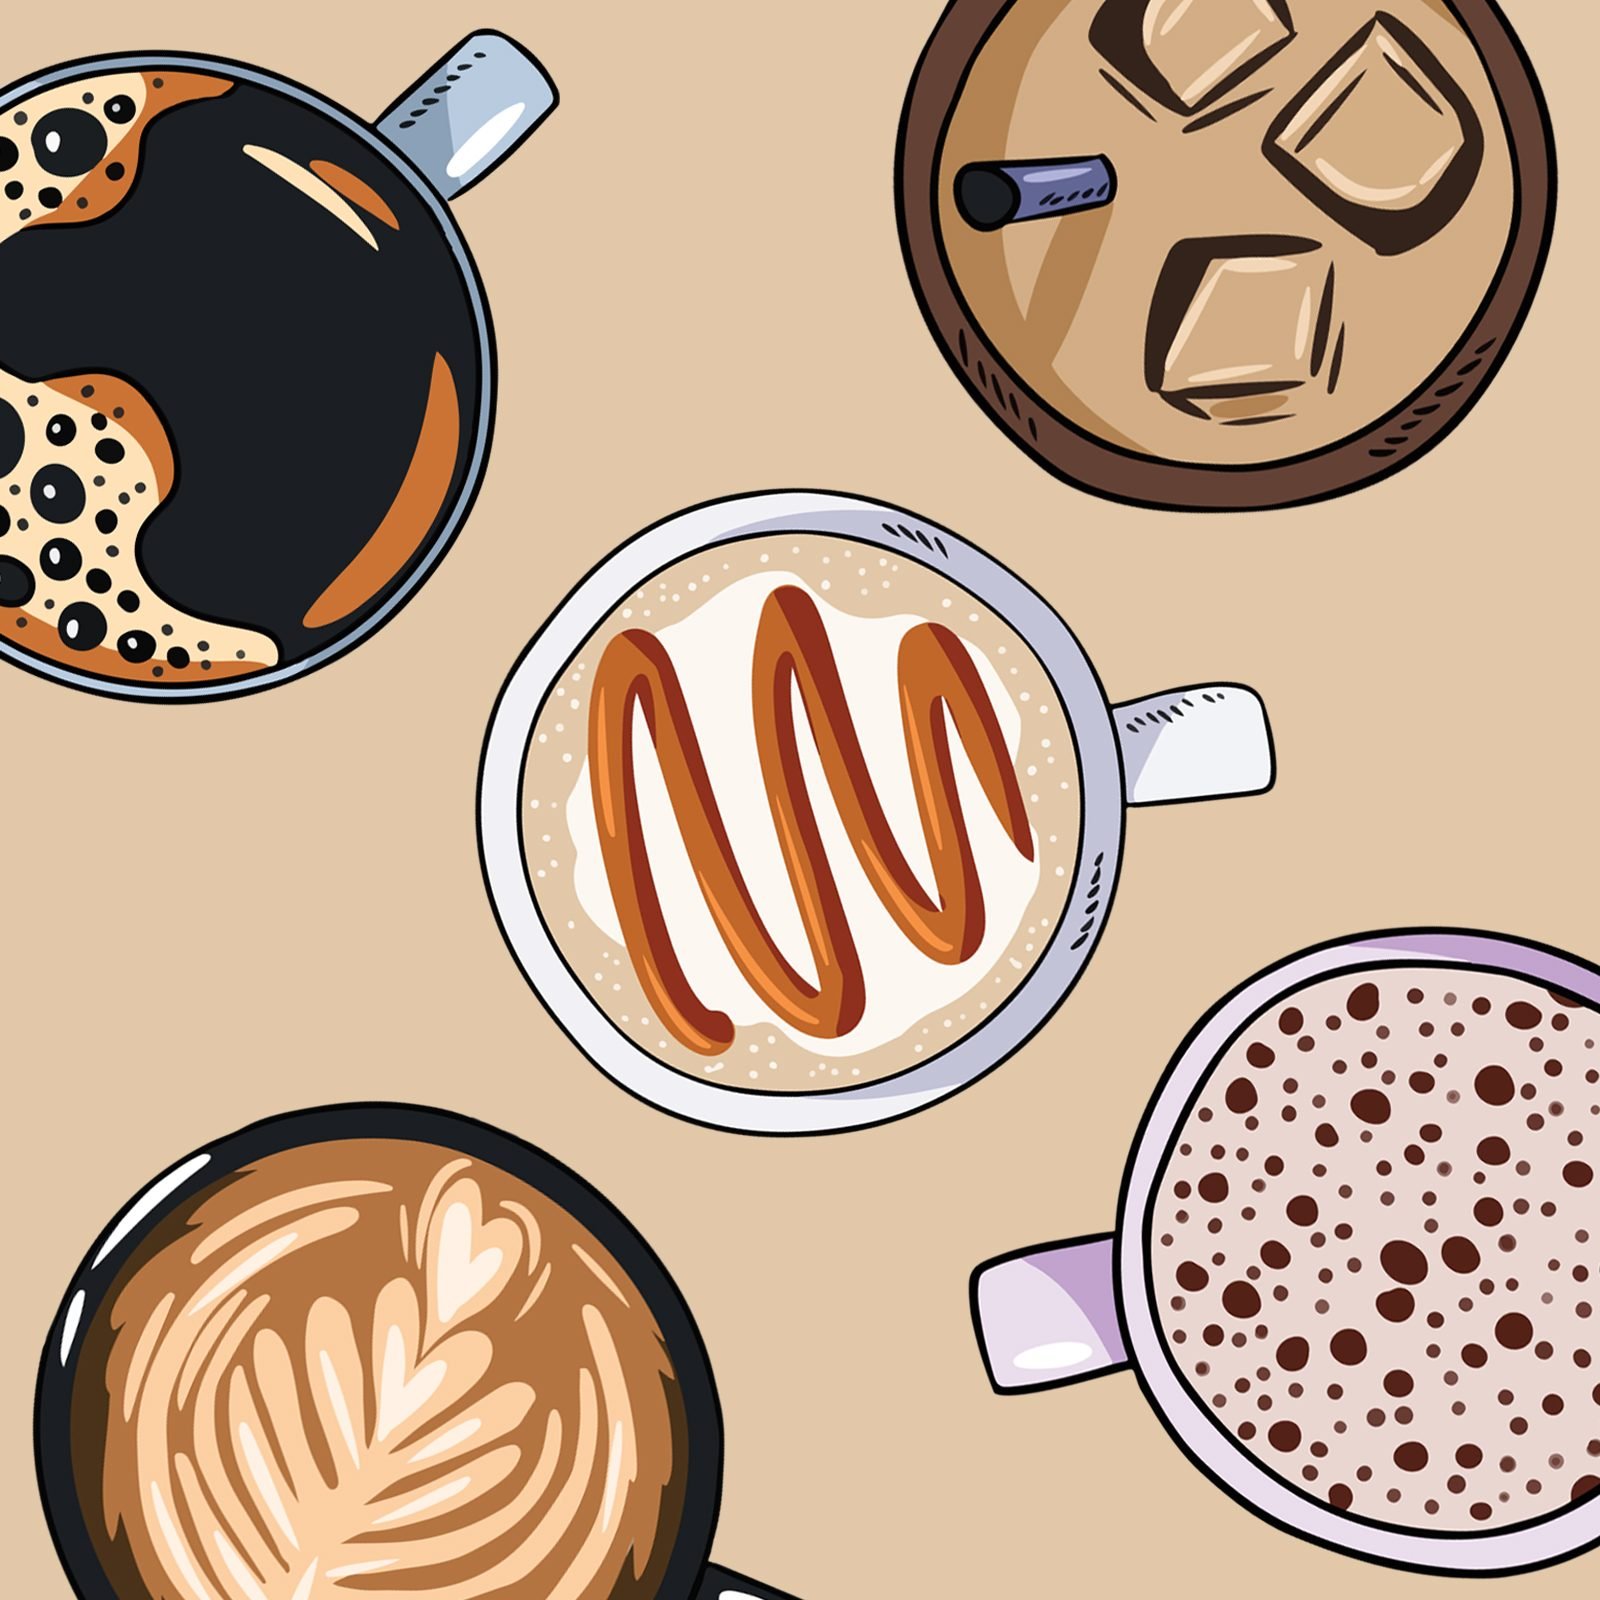 Coffee Lovers- These are a few of my favorite things